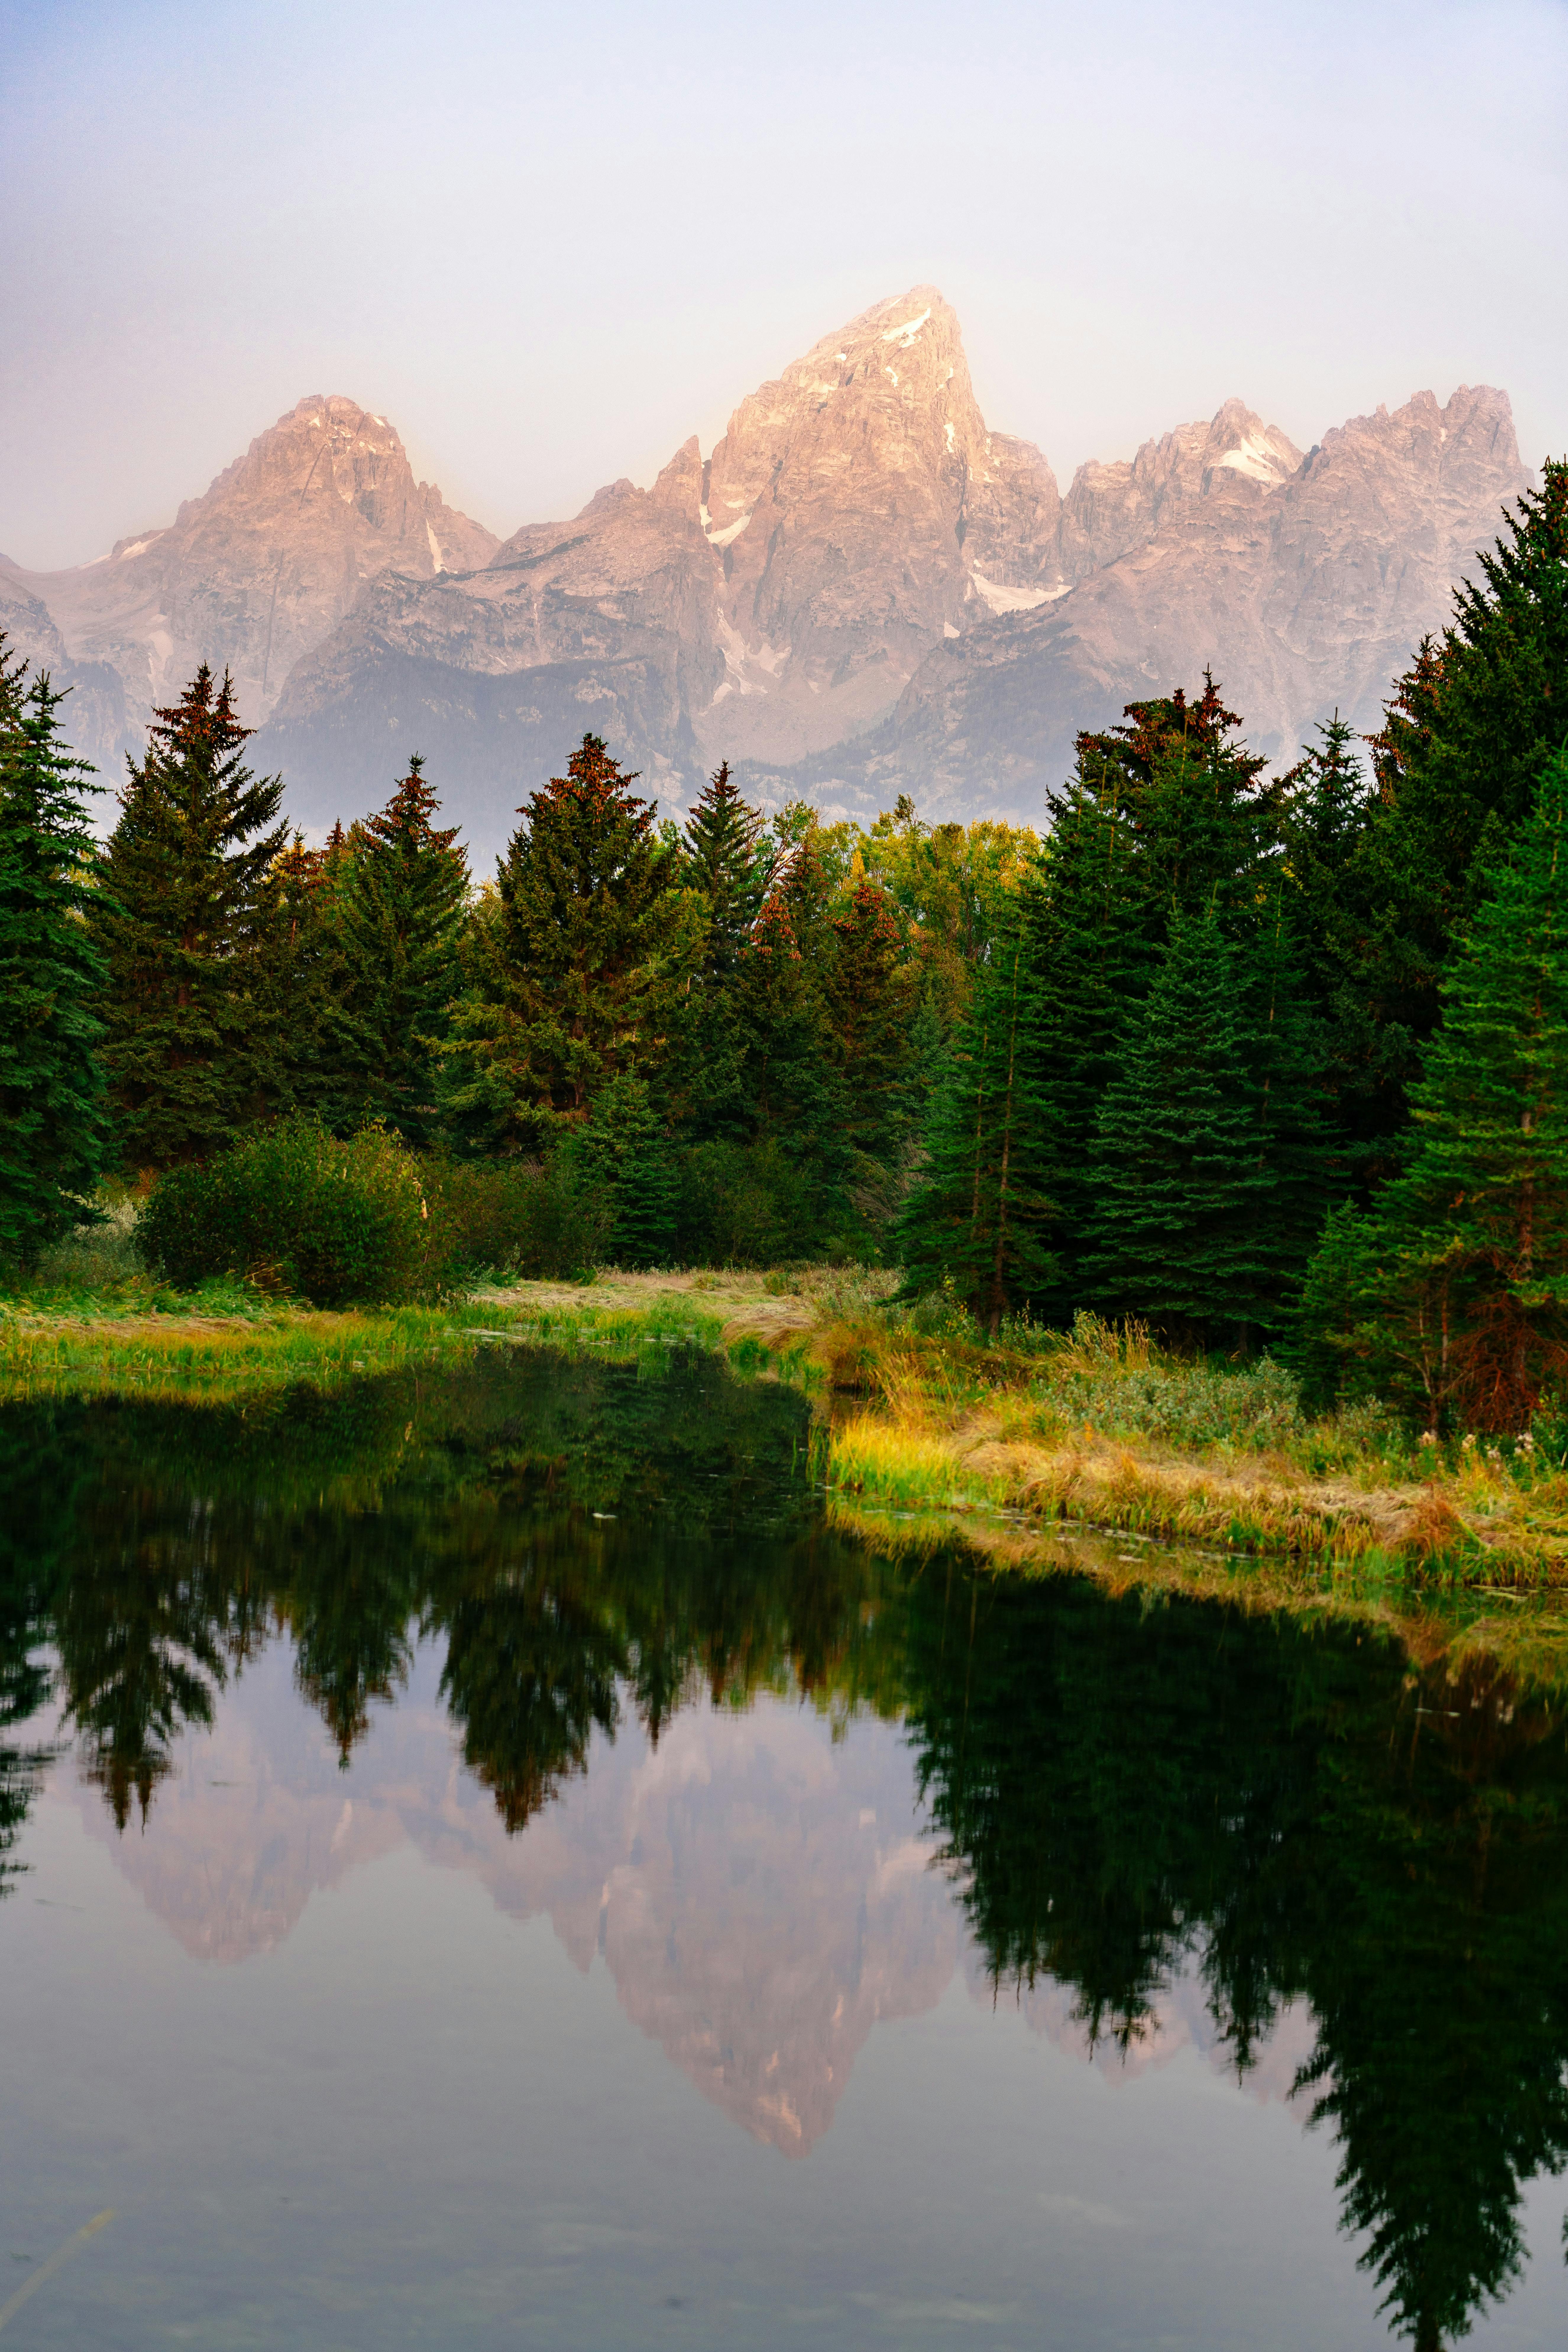 Pink, jagged peaks and green pines are perfectly reflected in a totally still pond.